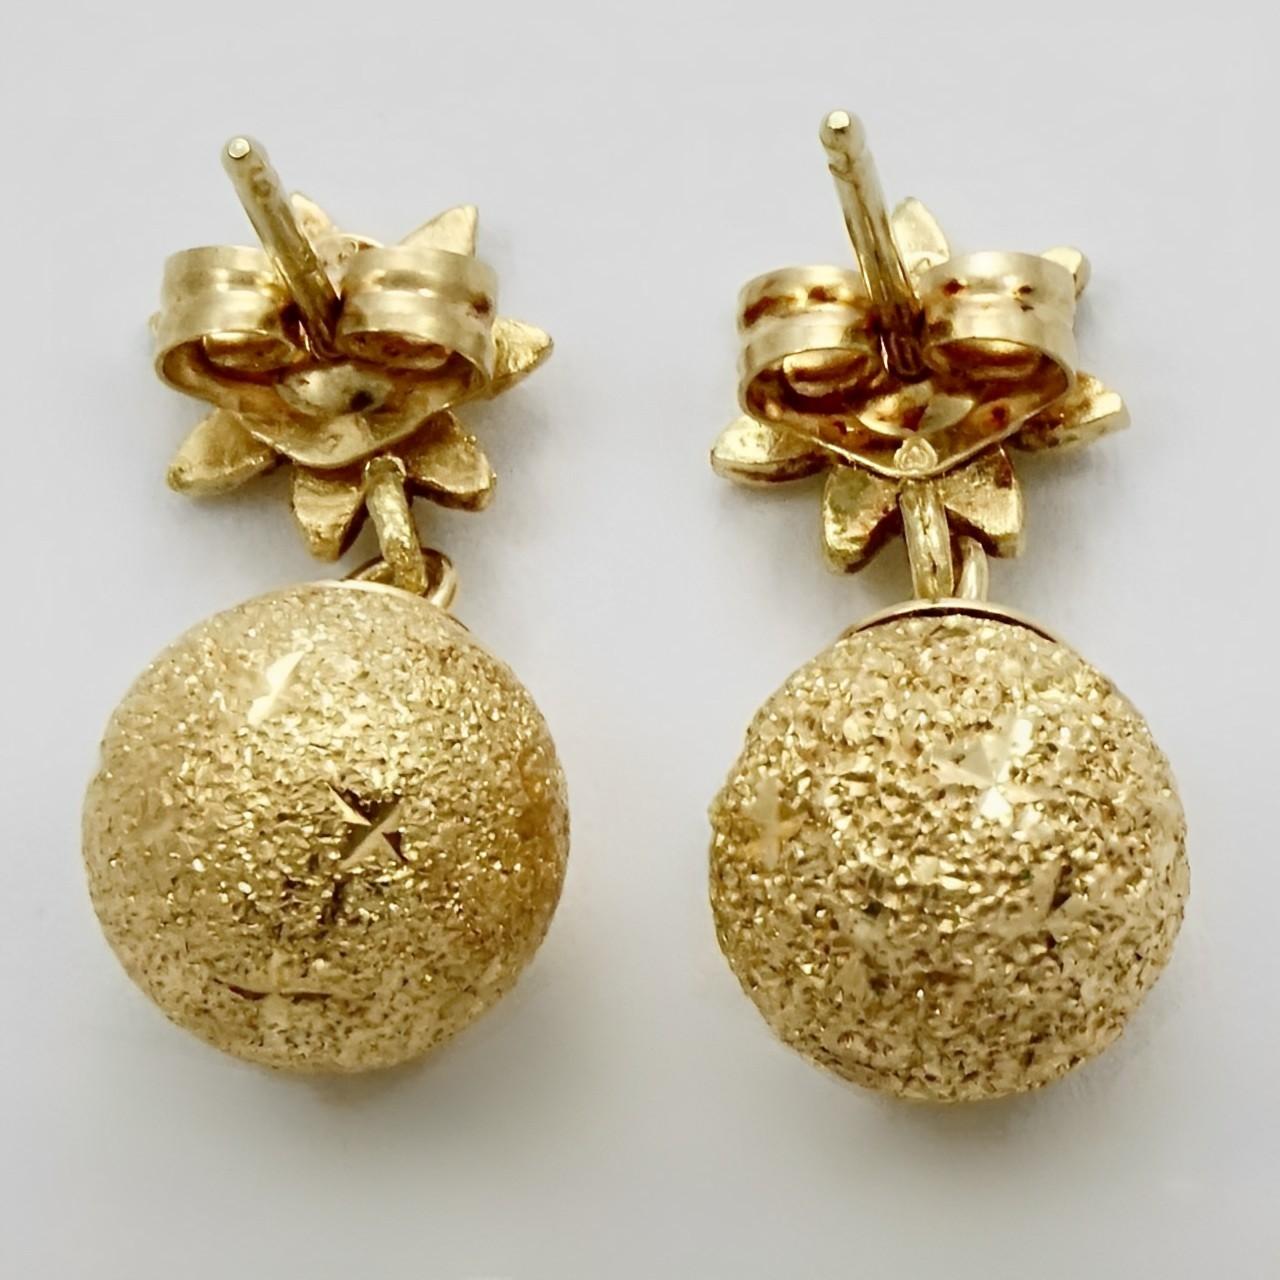 Lovely 14K gold earrings featuring textured balls with a diamond cut design dropping from diamond cut flowers. Length 1.8 cm / .7 inch and the ball is 8 mm / .3 inch.

This is a beautiful pair of gold earrings with movement and sparkle.